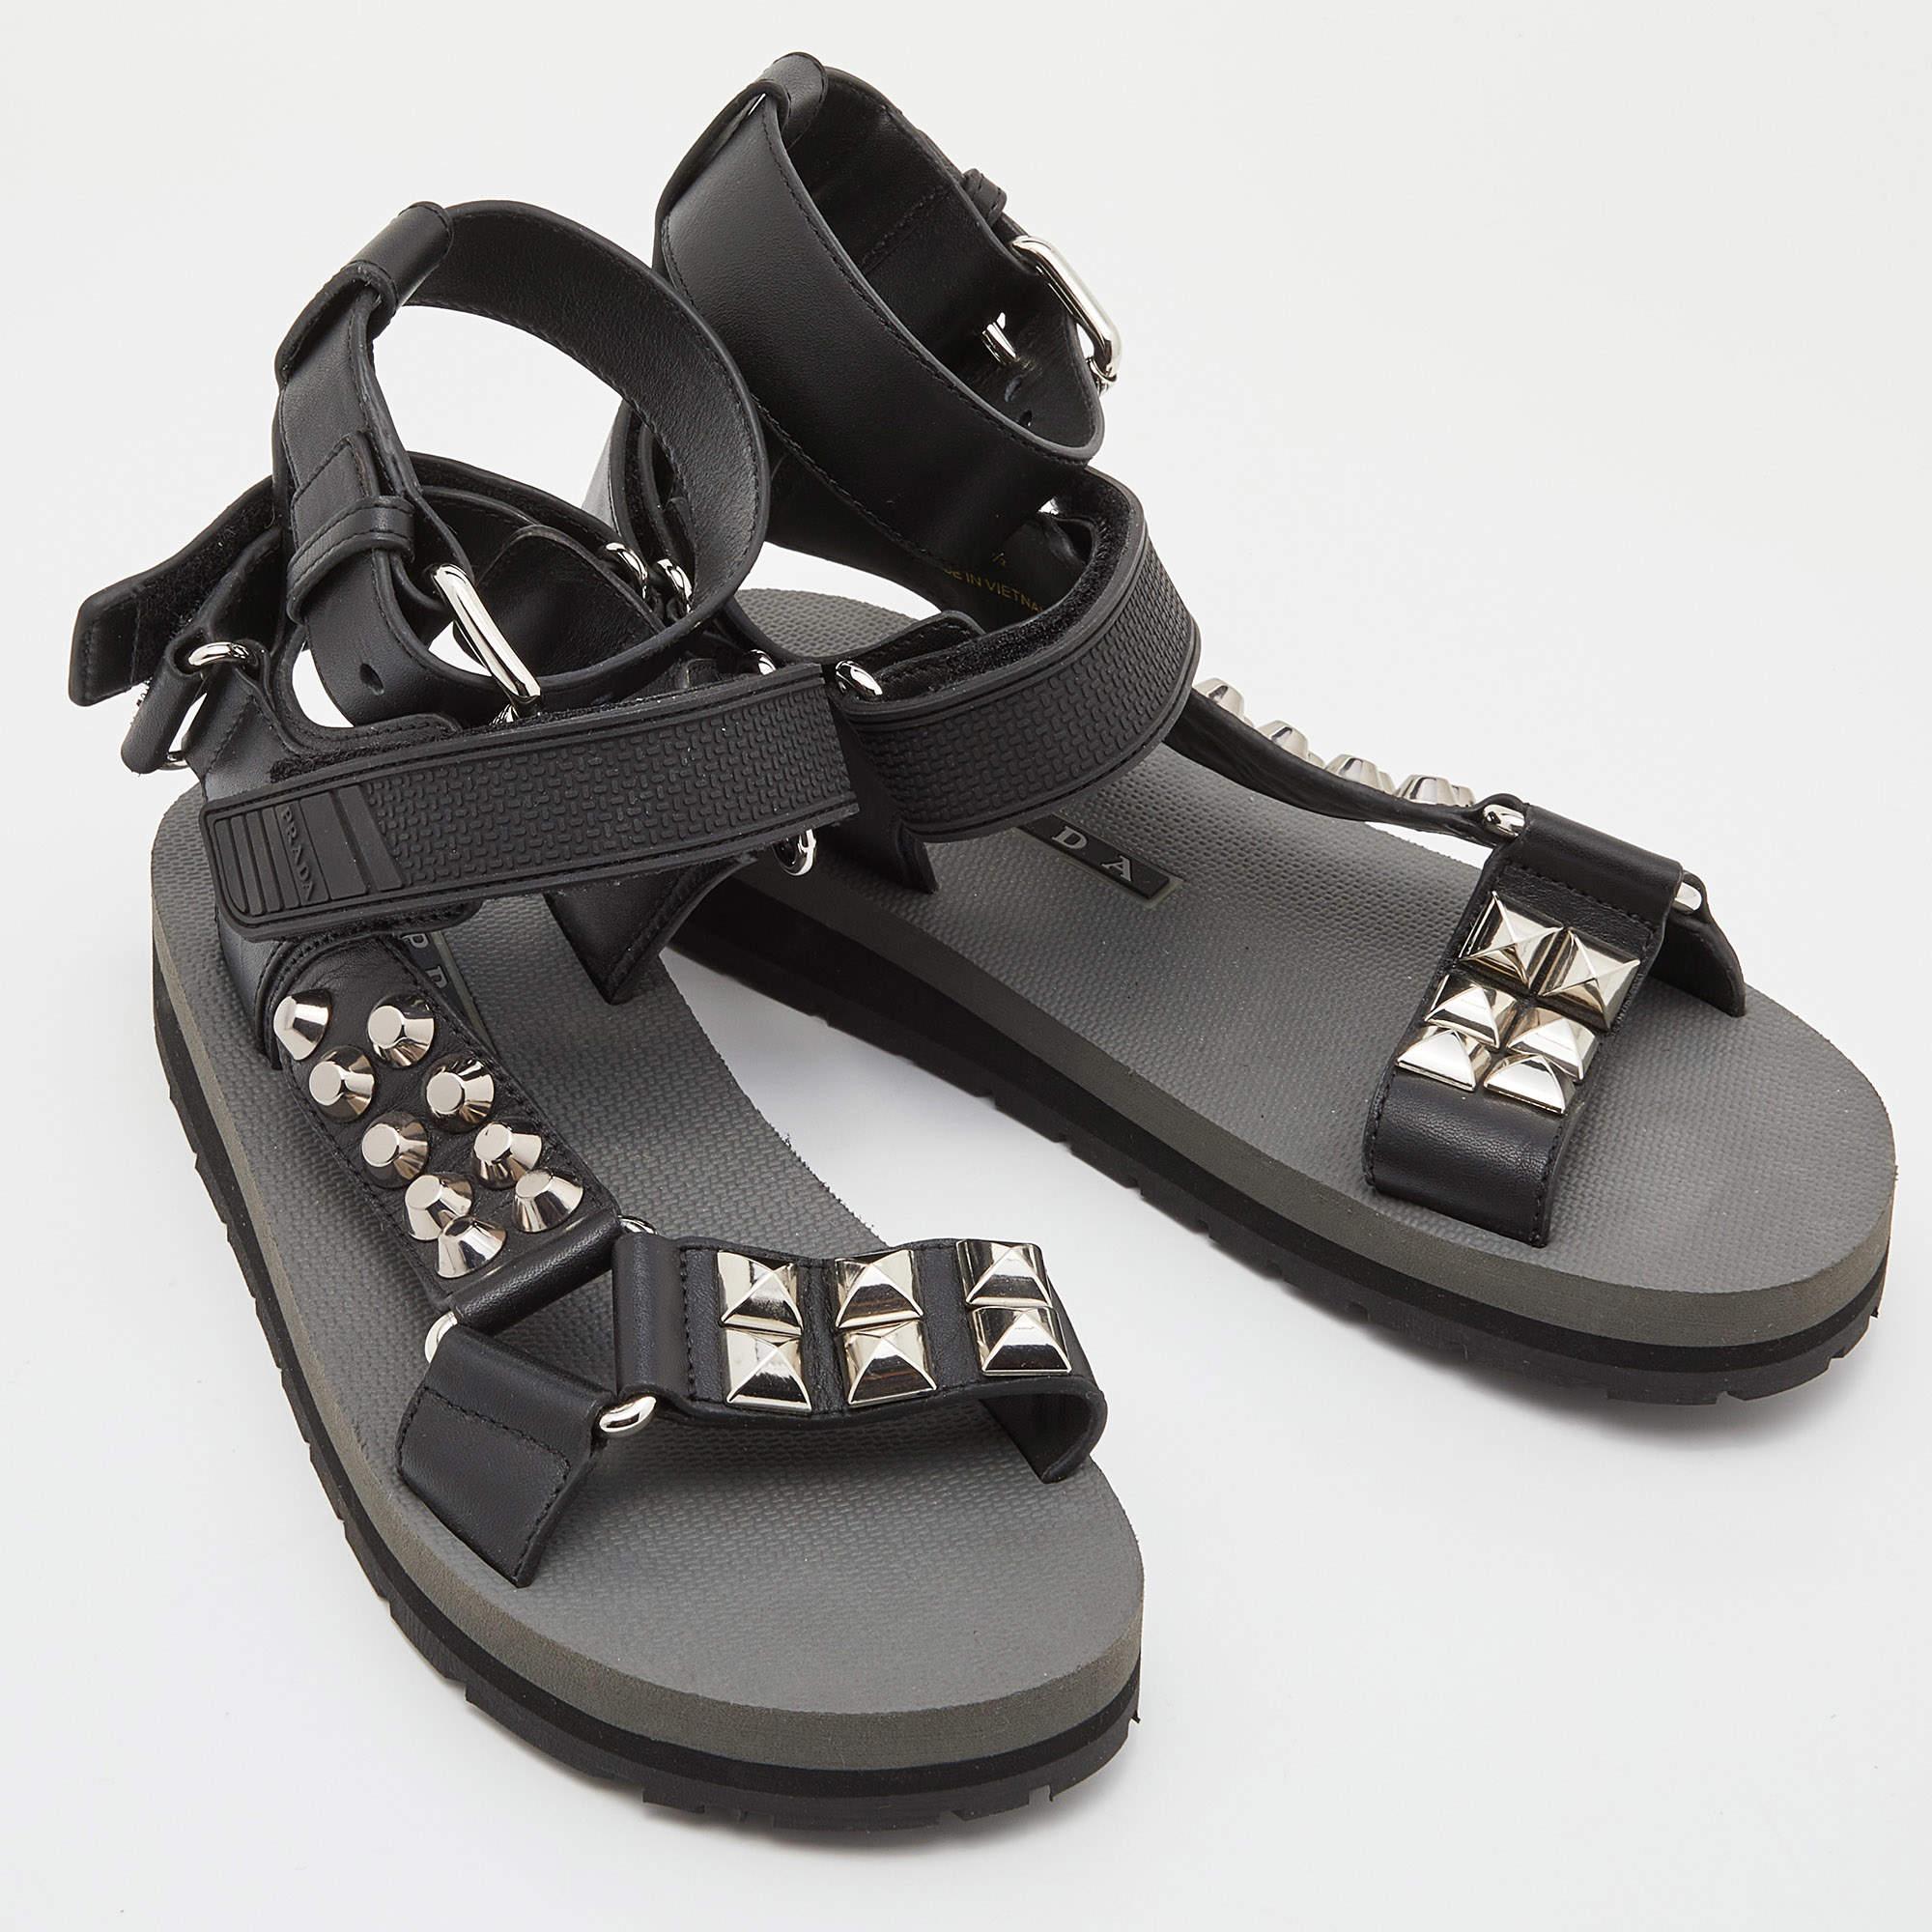 Prada Black Leather and Rubber Punk Stud Ankle Strap Flat Sandals Size 37.5 1